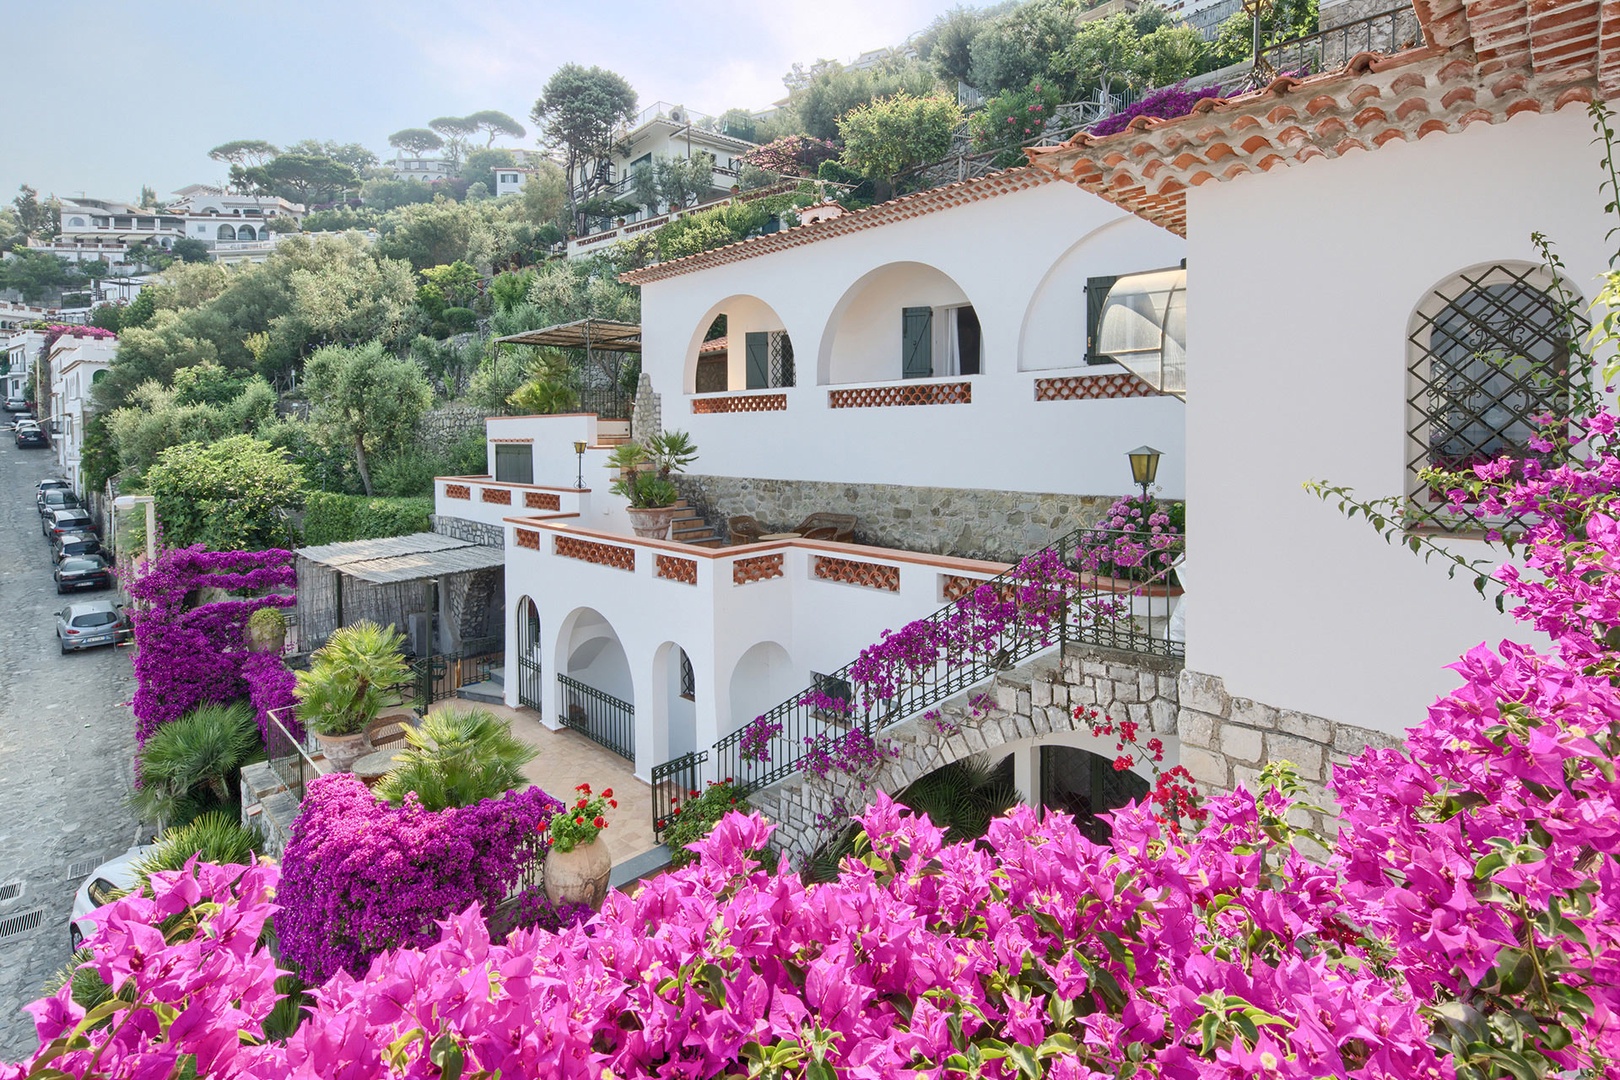 Vila Sole is a dreamy seaside villa with unforgettable views and direct water access.